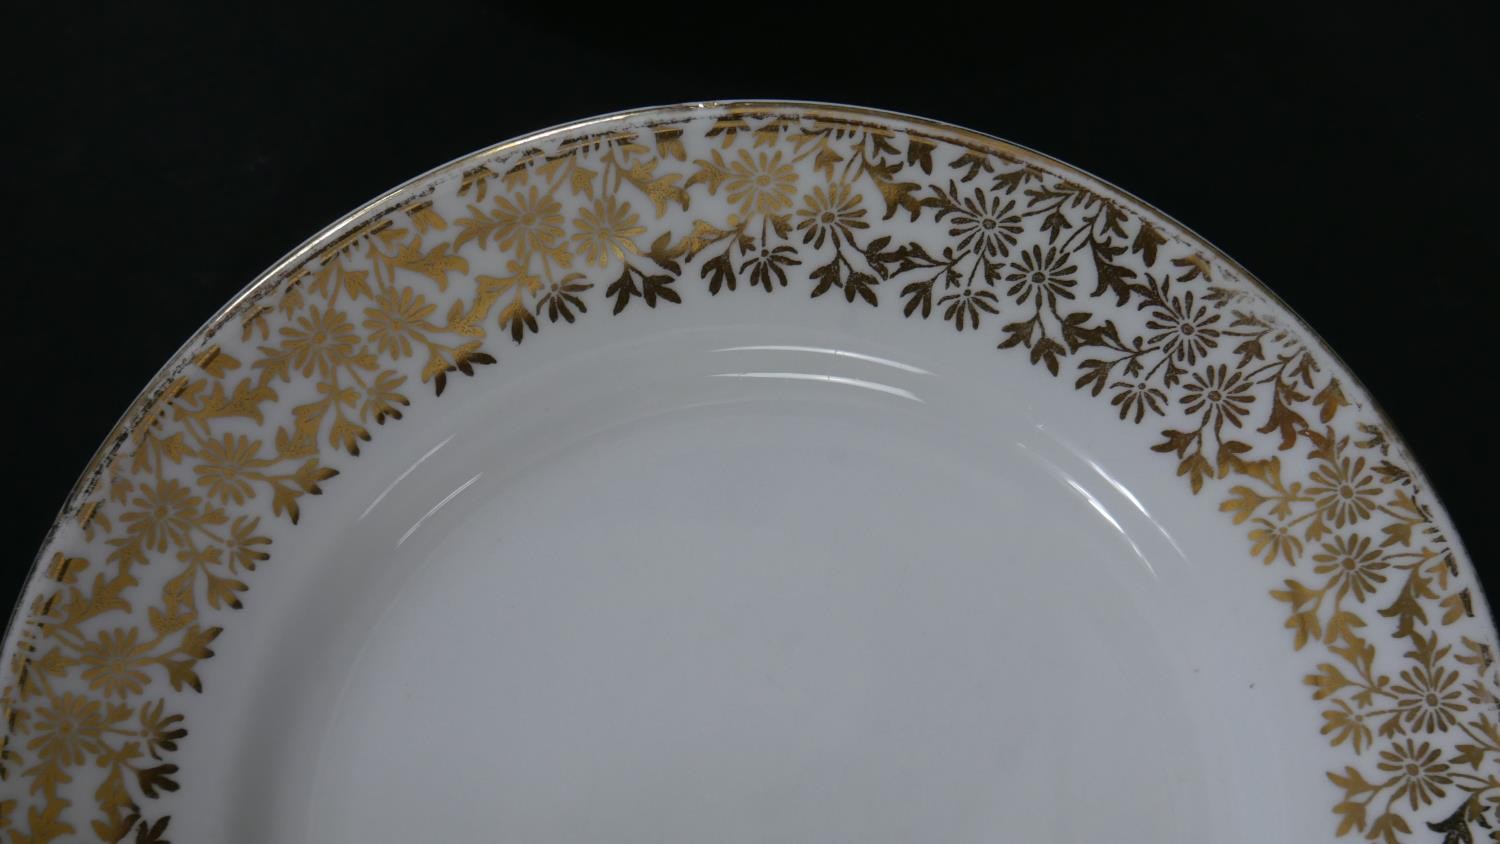 An Adderley gilded floral design fine bone china part six person tea set. Six tea cups and - Image 6 of 8